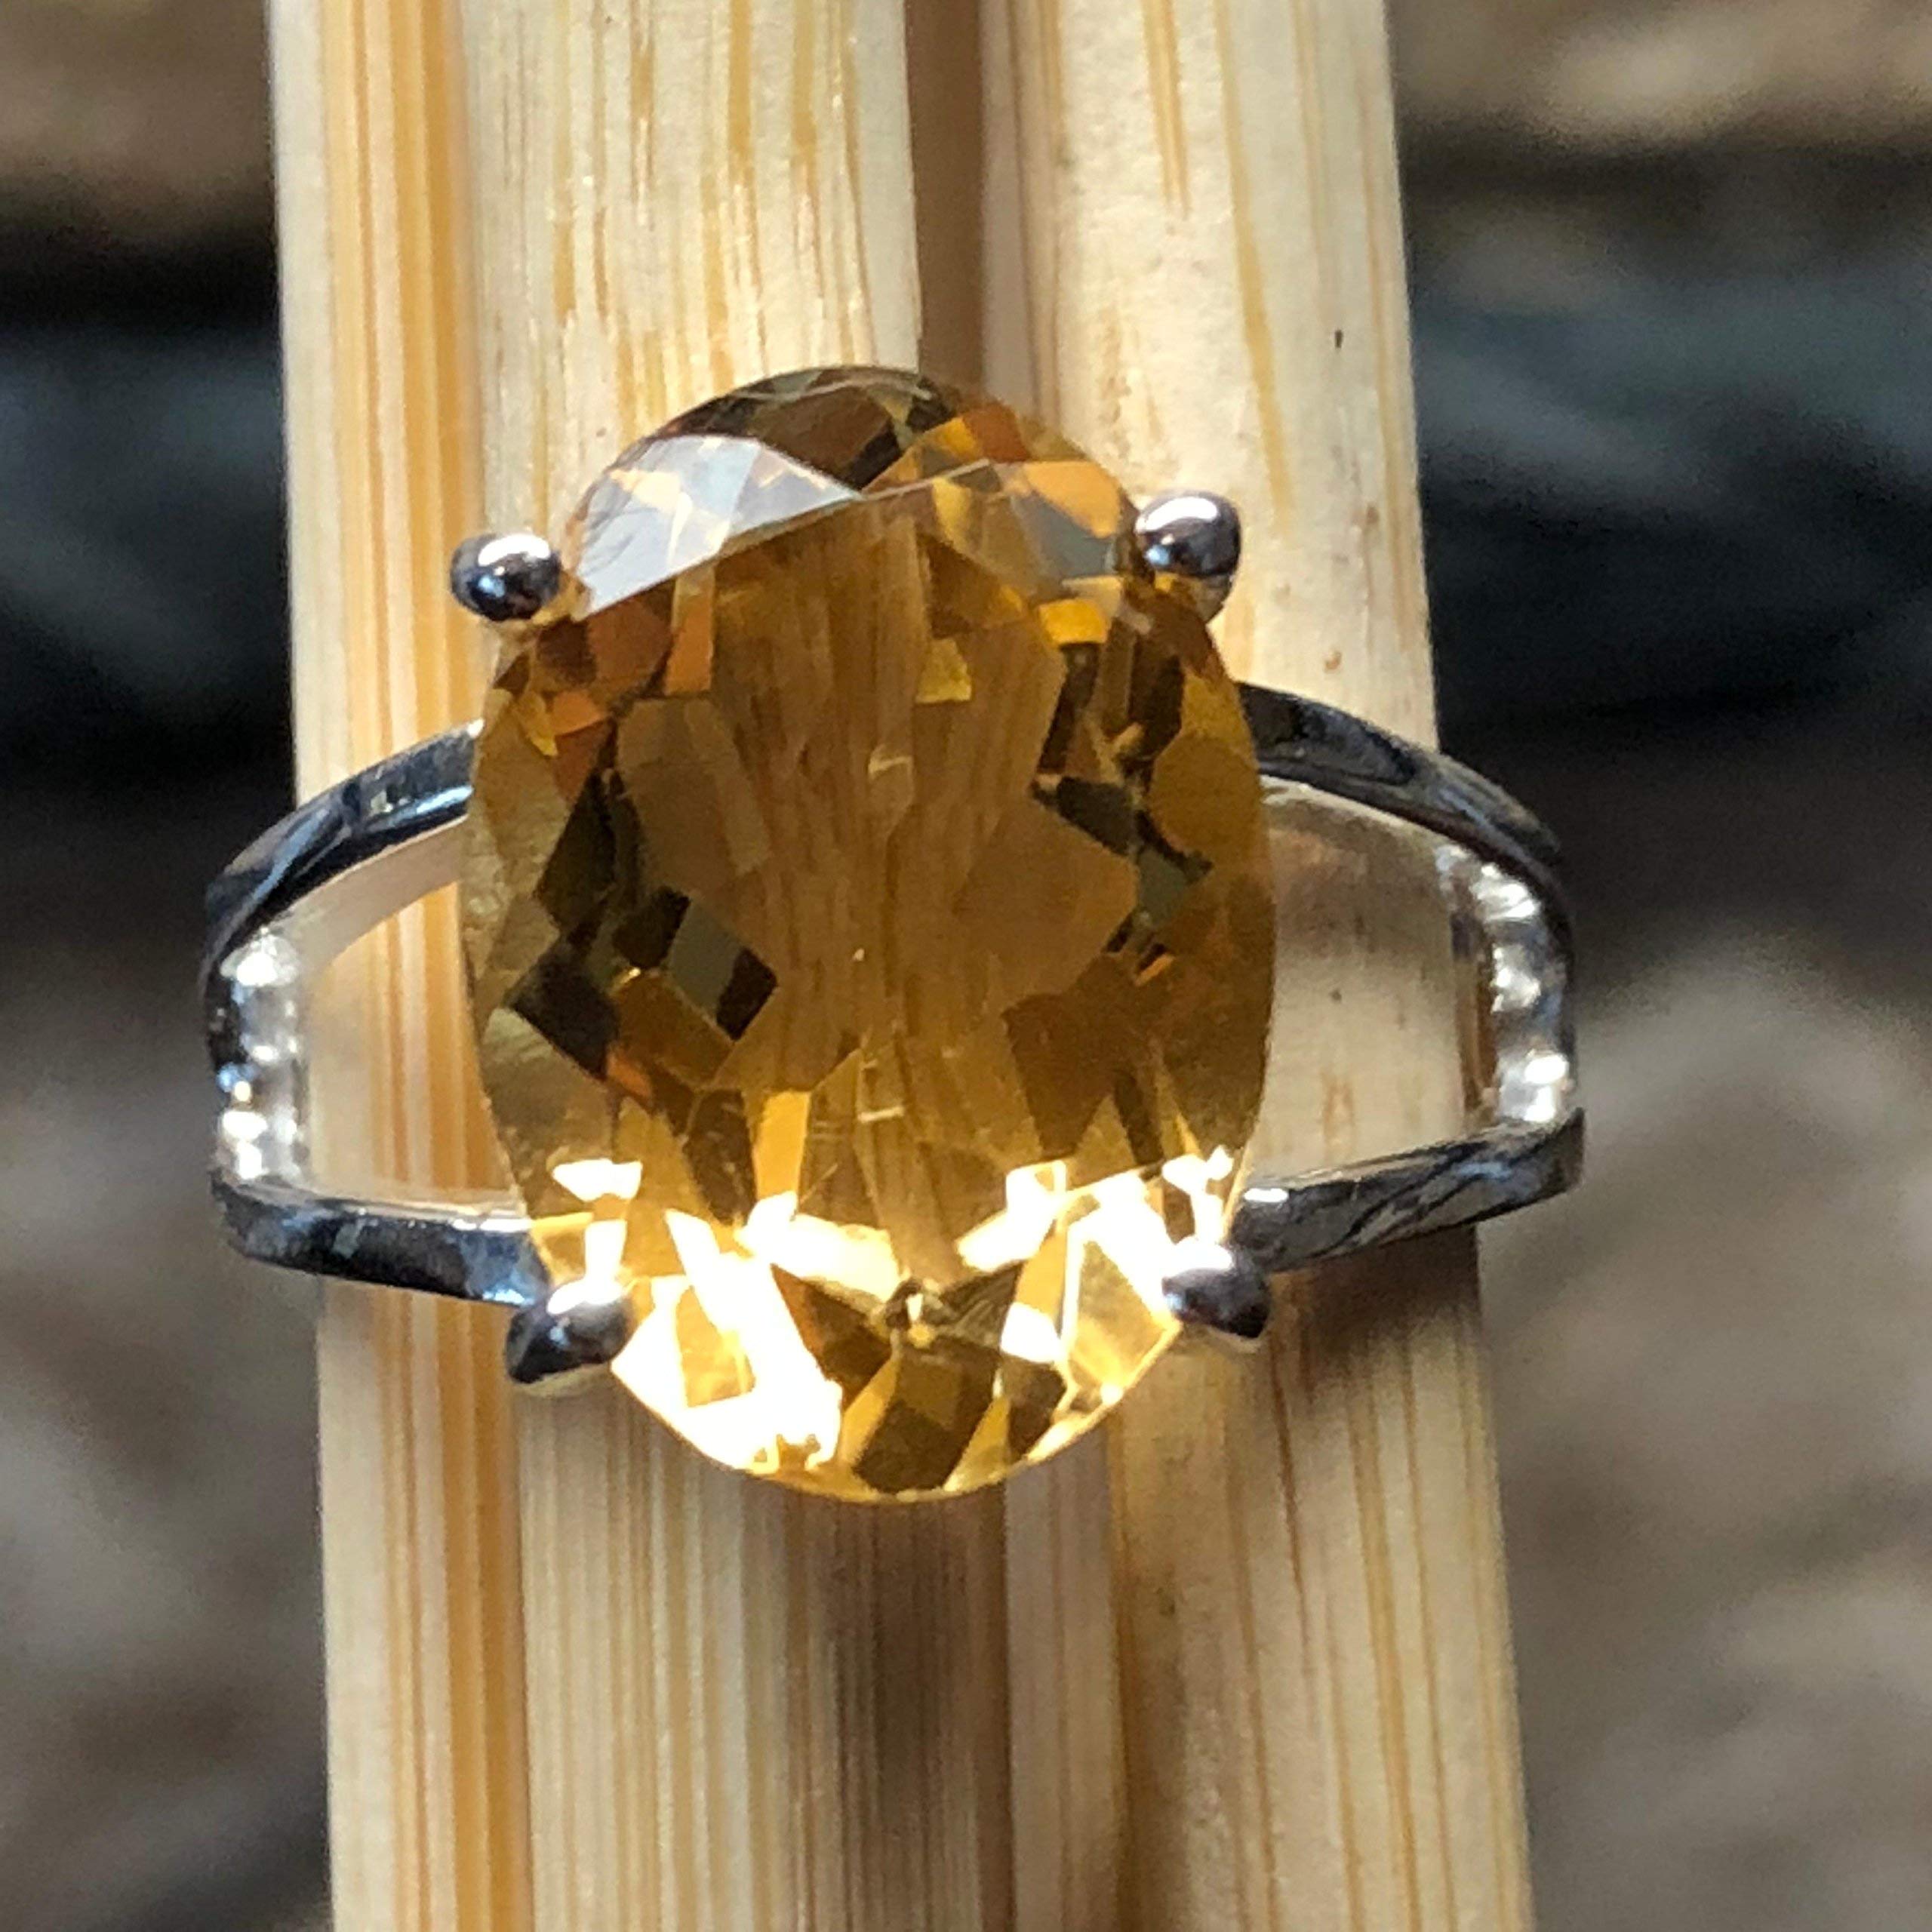 Genuine 4ct Golden Citrine 925 Solid Sterling Silver Ring Size 6, 7, 8, 9 - Natural Rocks by Kala